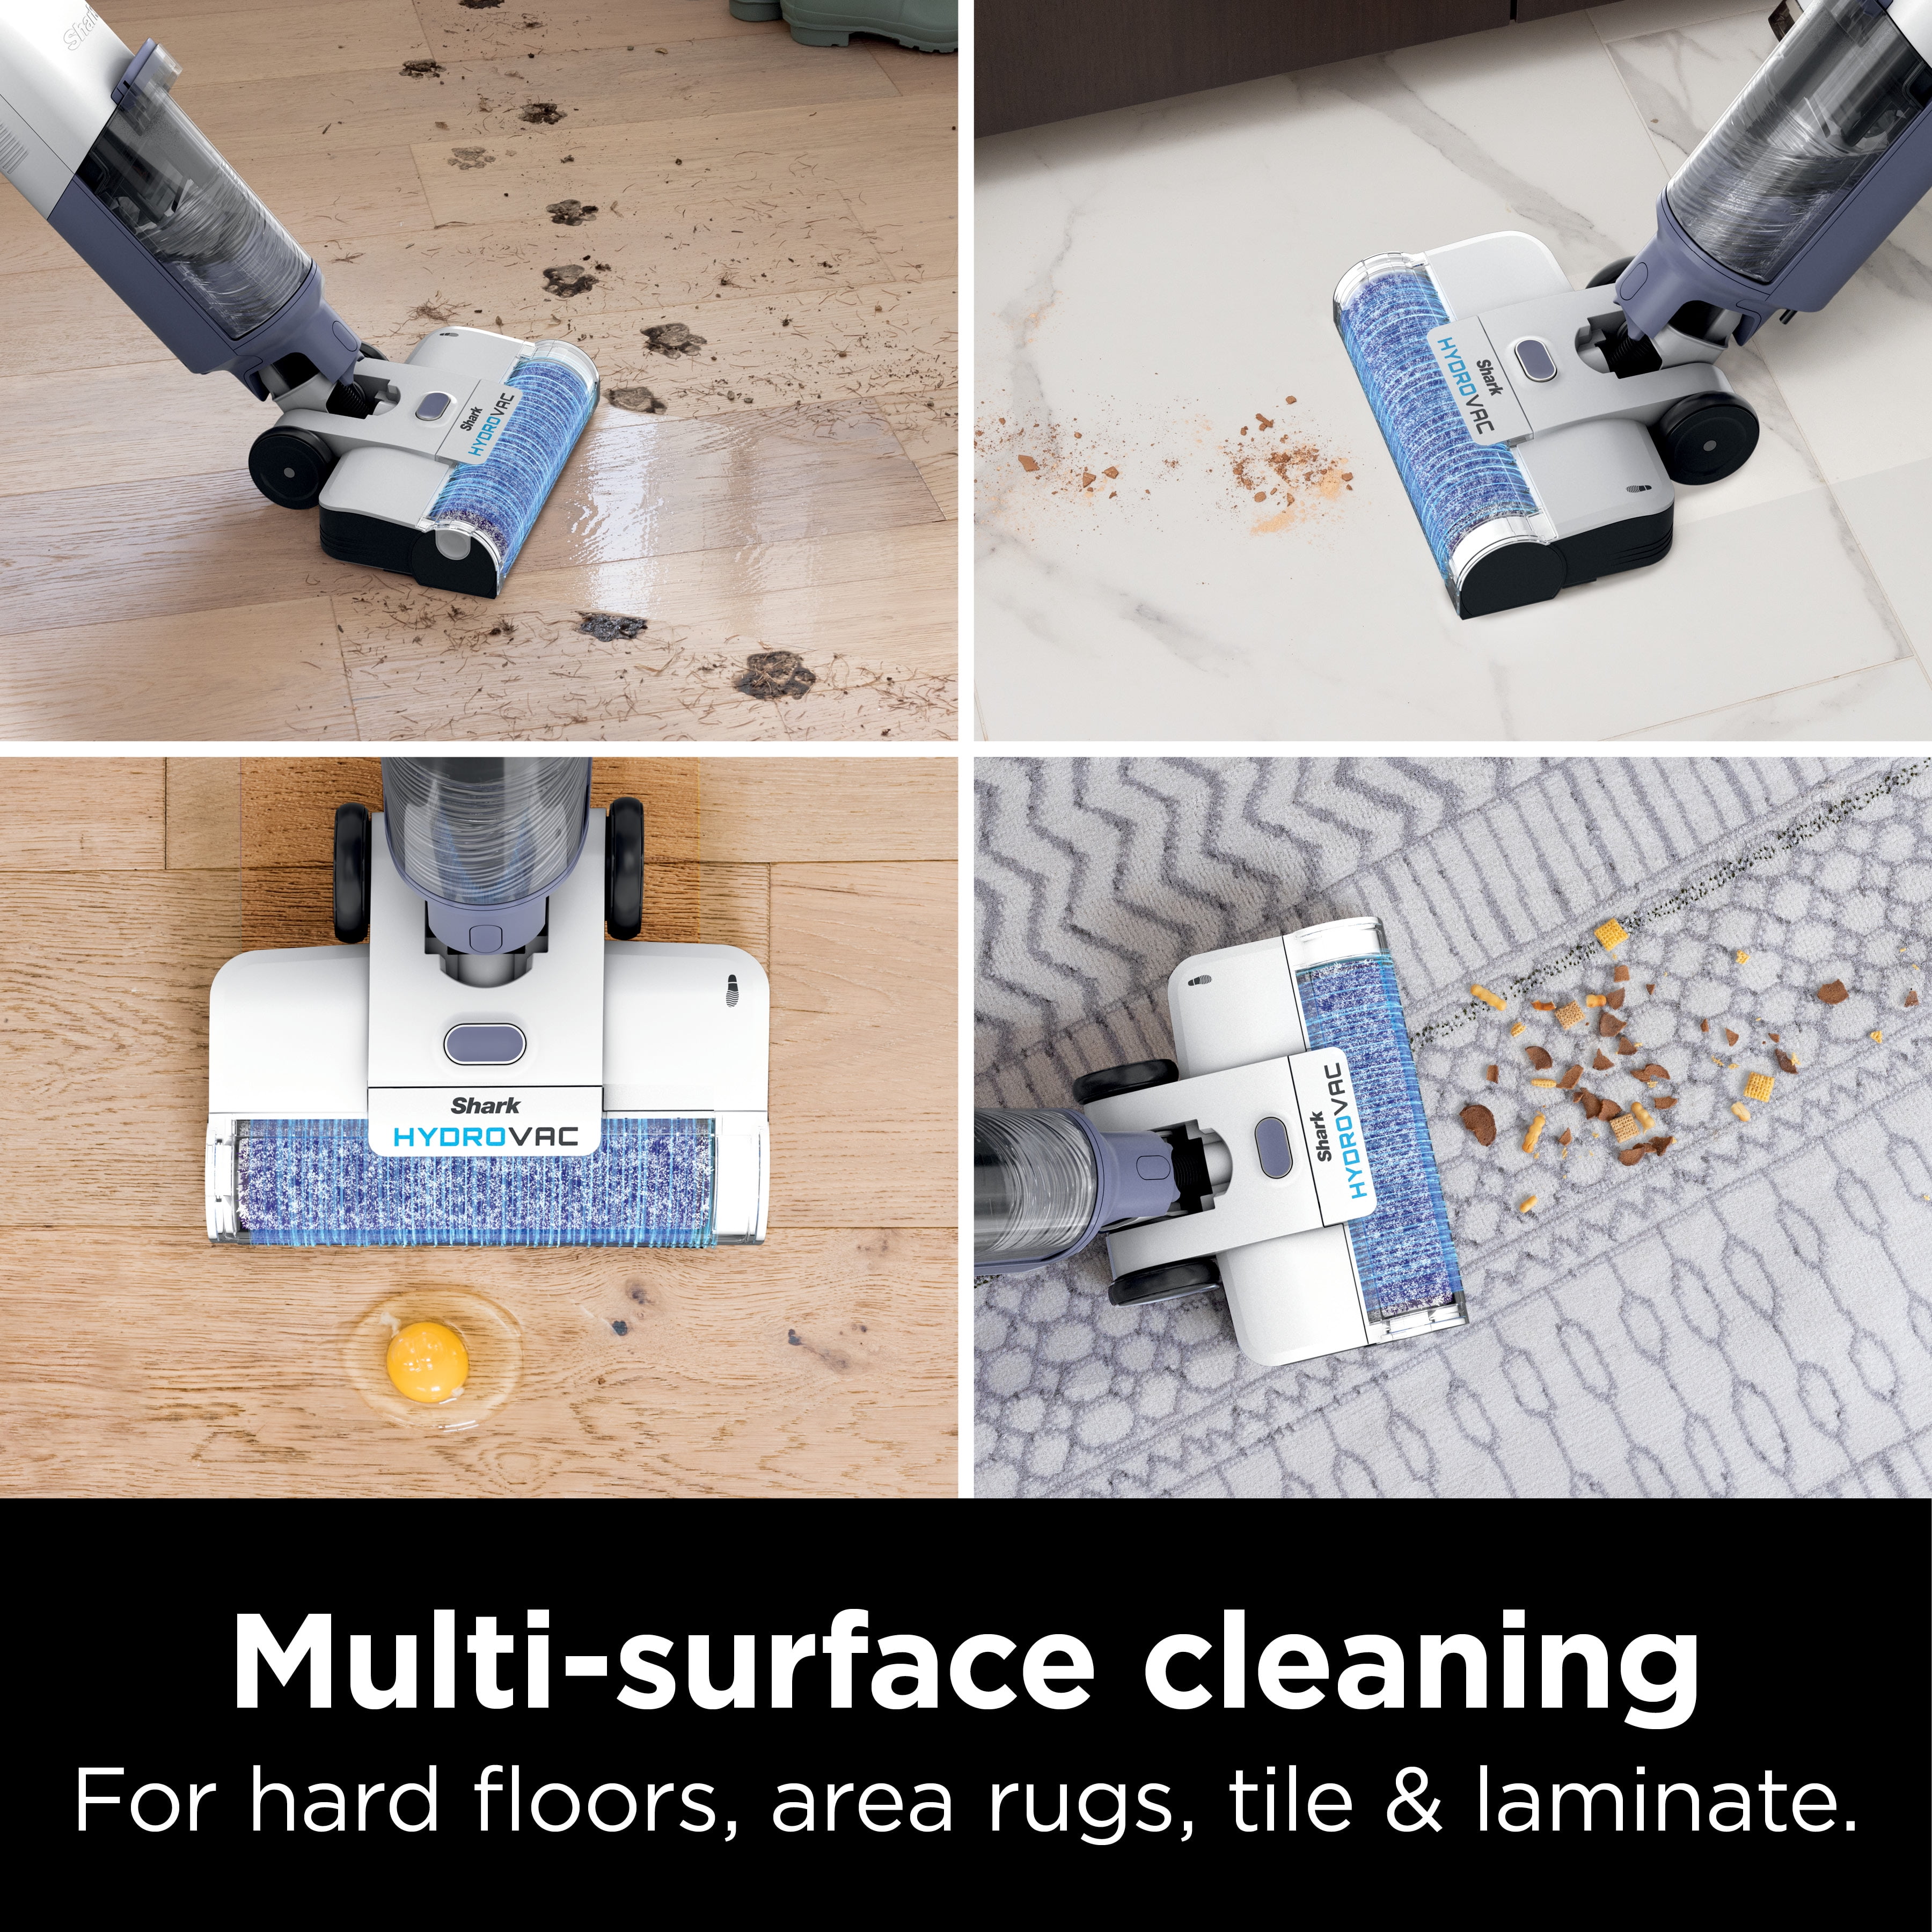 Shark HydroVac™ Cordless Pro 3in1 vacuum, mop & self-cleaning system, with antimicrobial brushroll* & cleaning solution, for Hardwood, Tile, Marble & Area Rugs, WD200 - 3